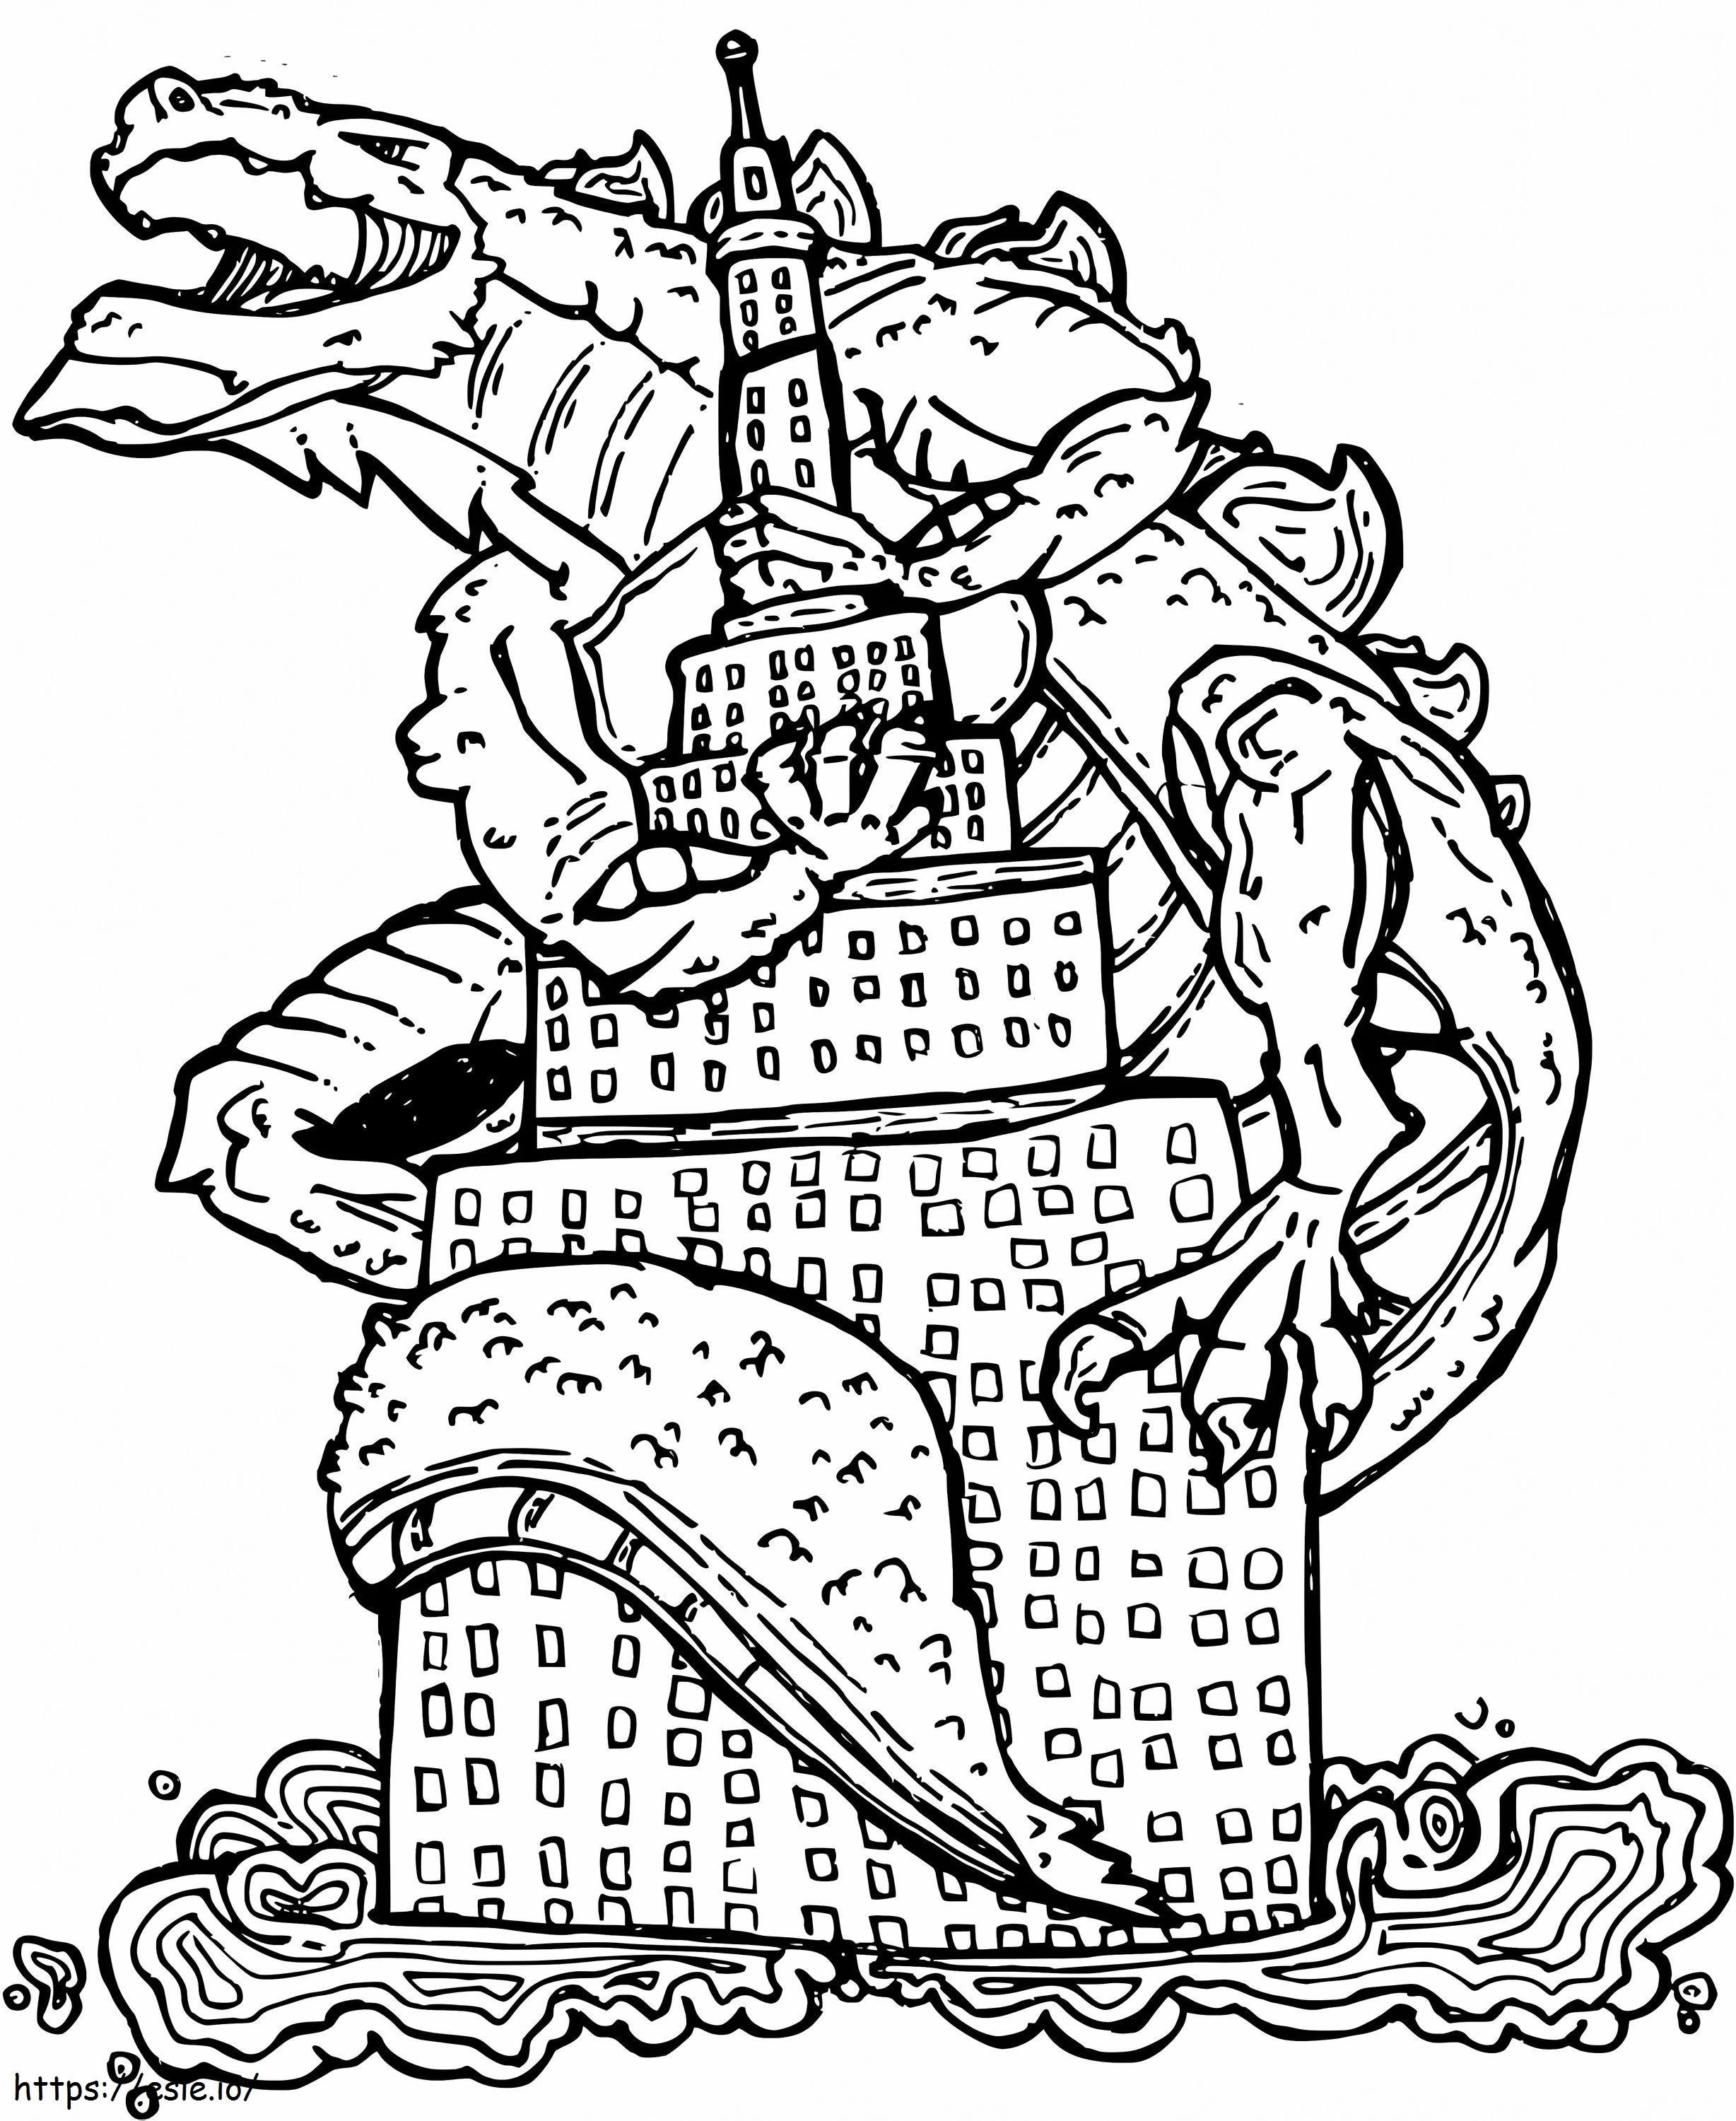 Godzilla Climbed A Building coloring page